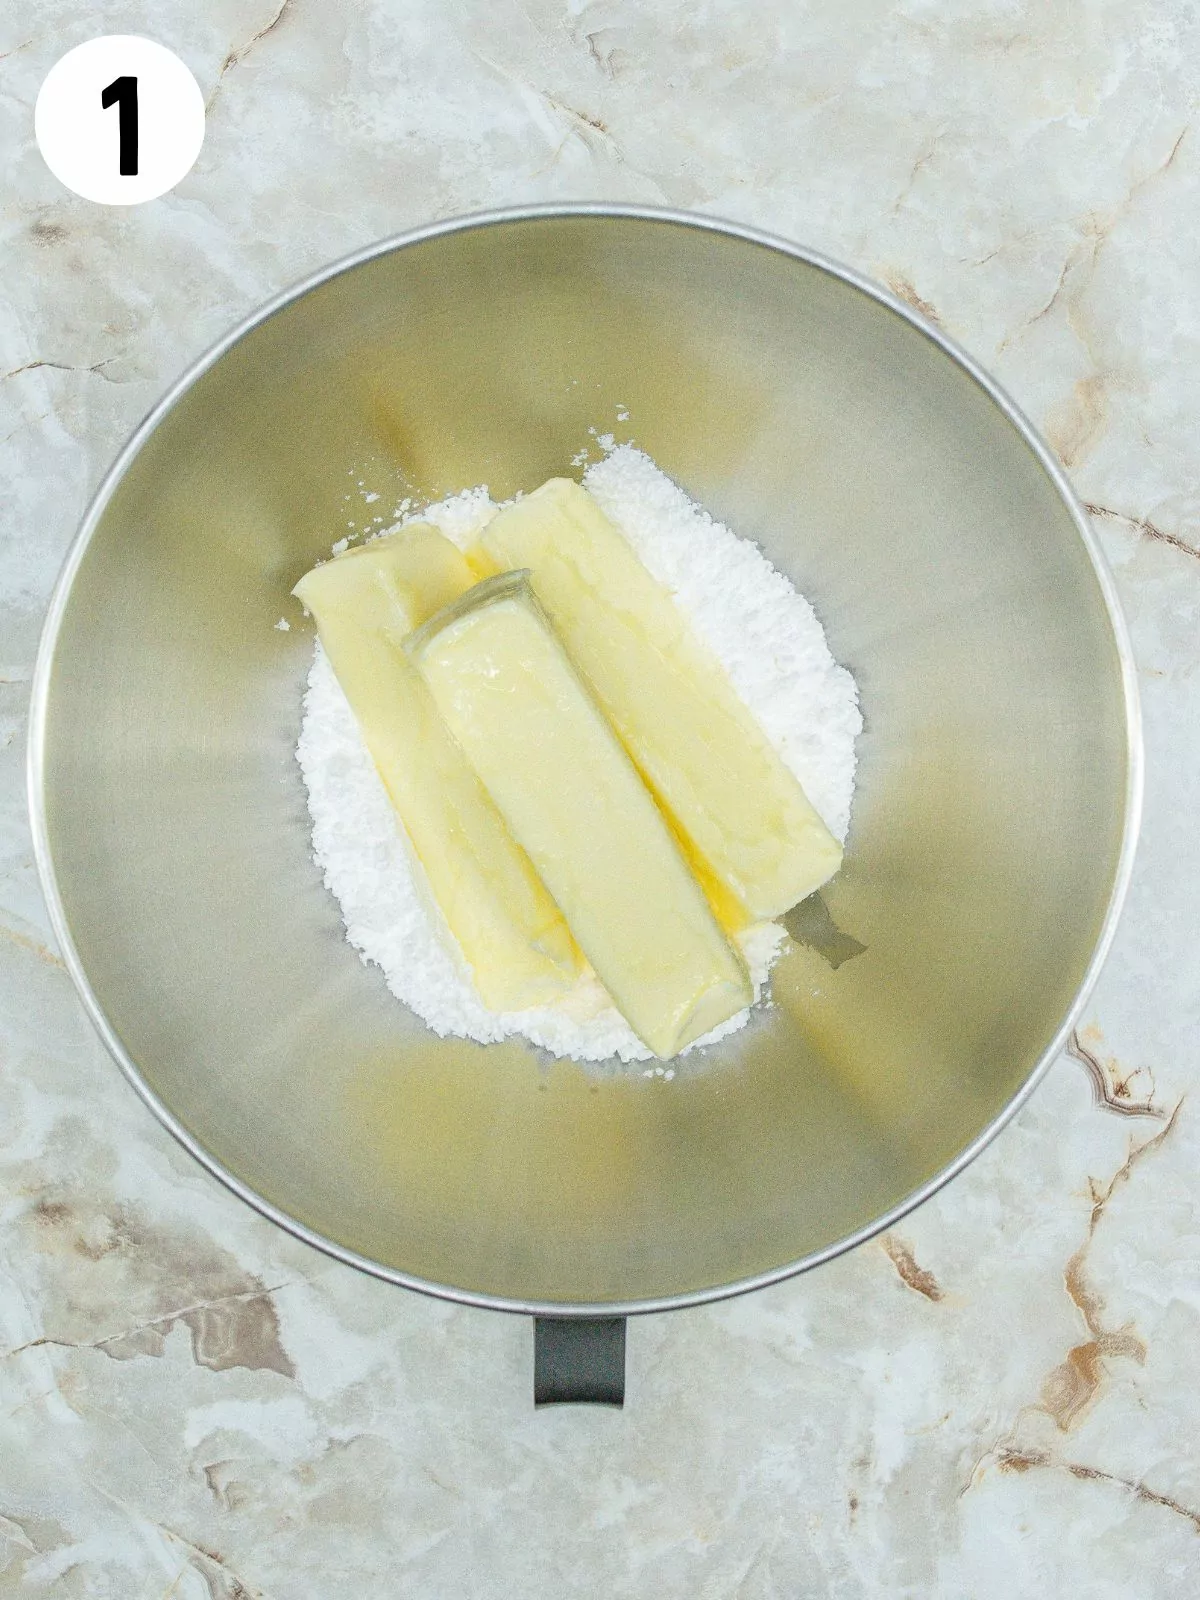 3 sticks of butter in bowl with powdered sugar.